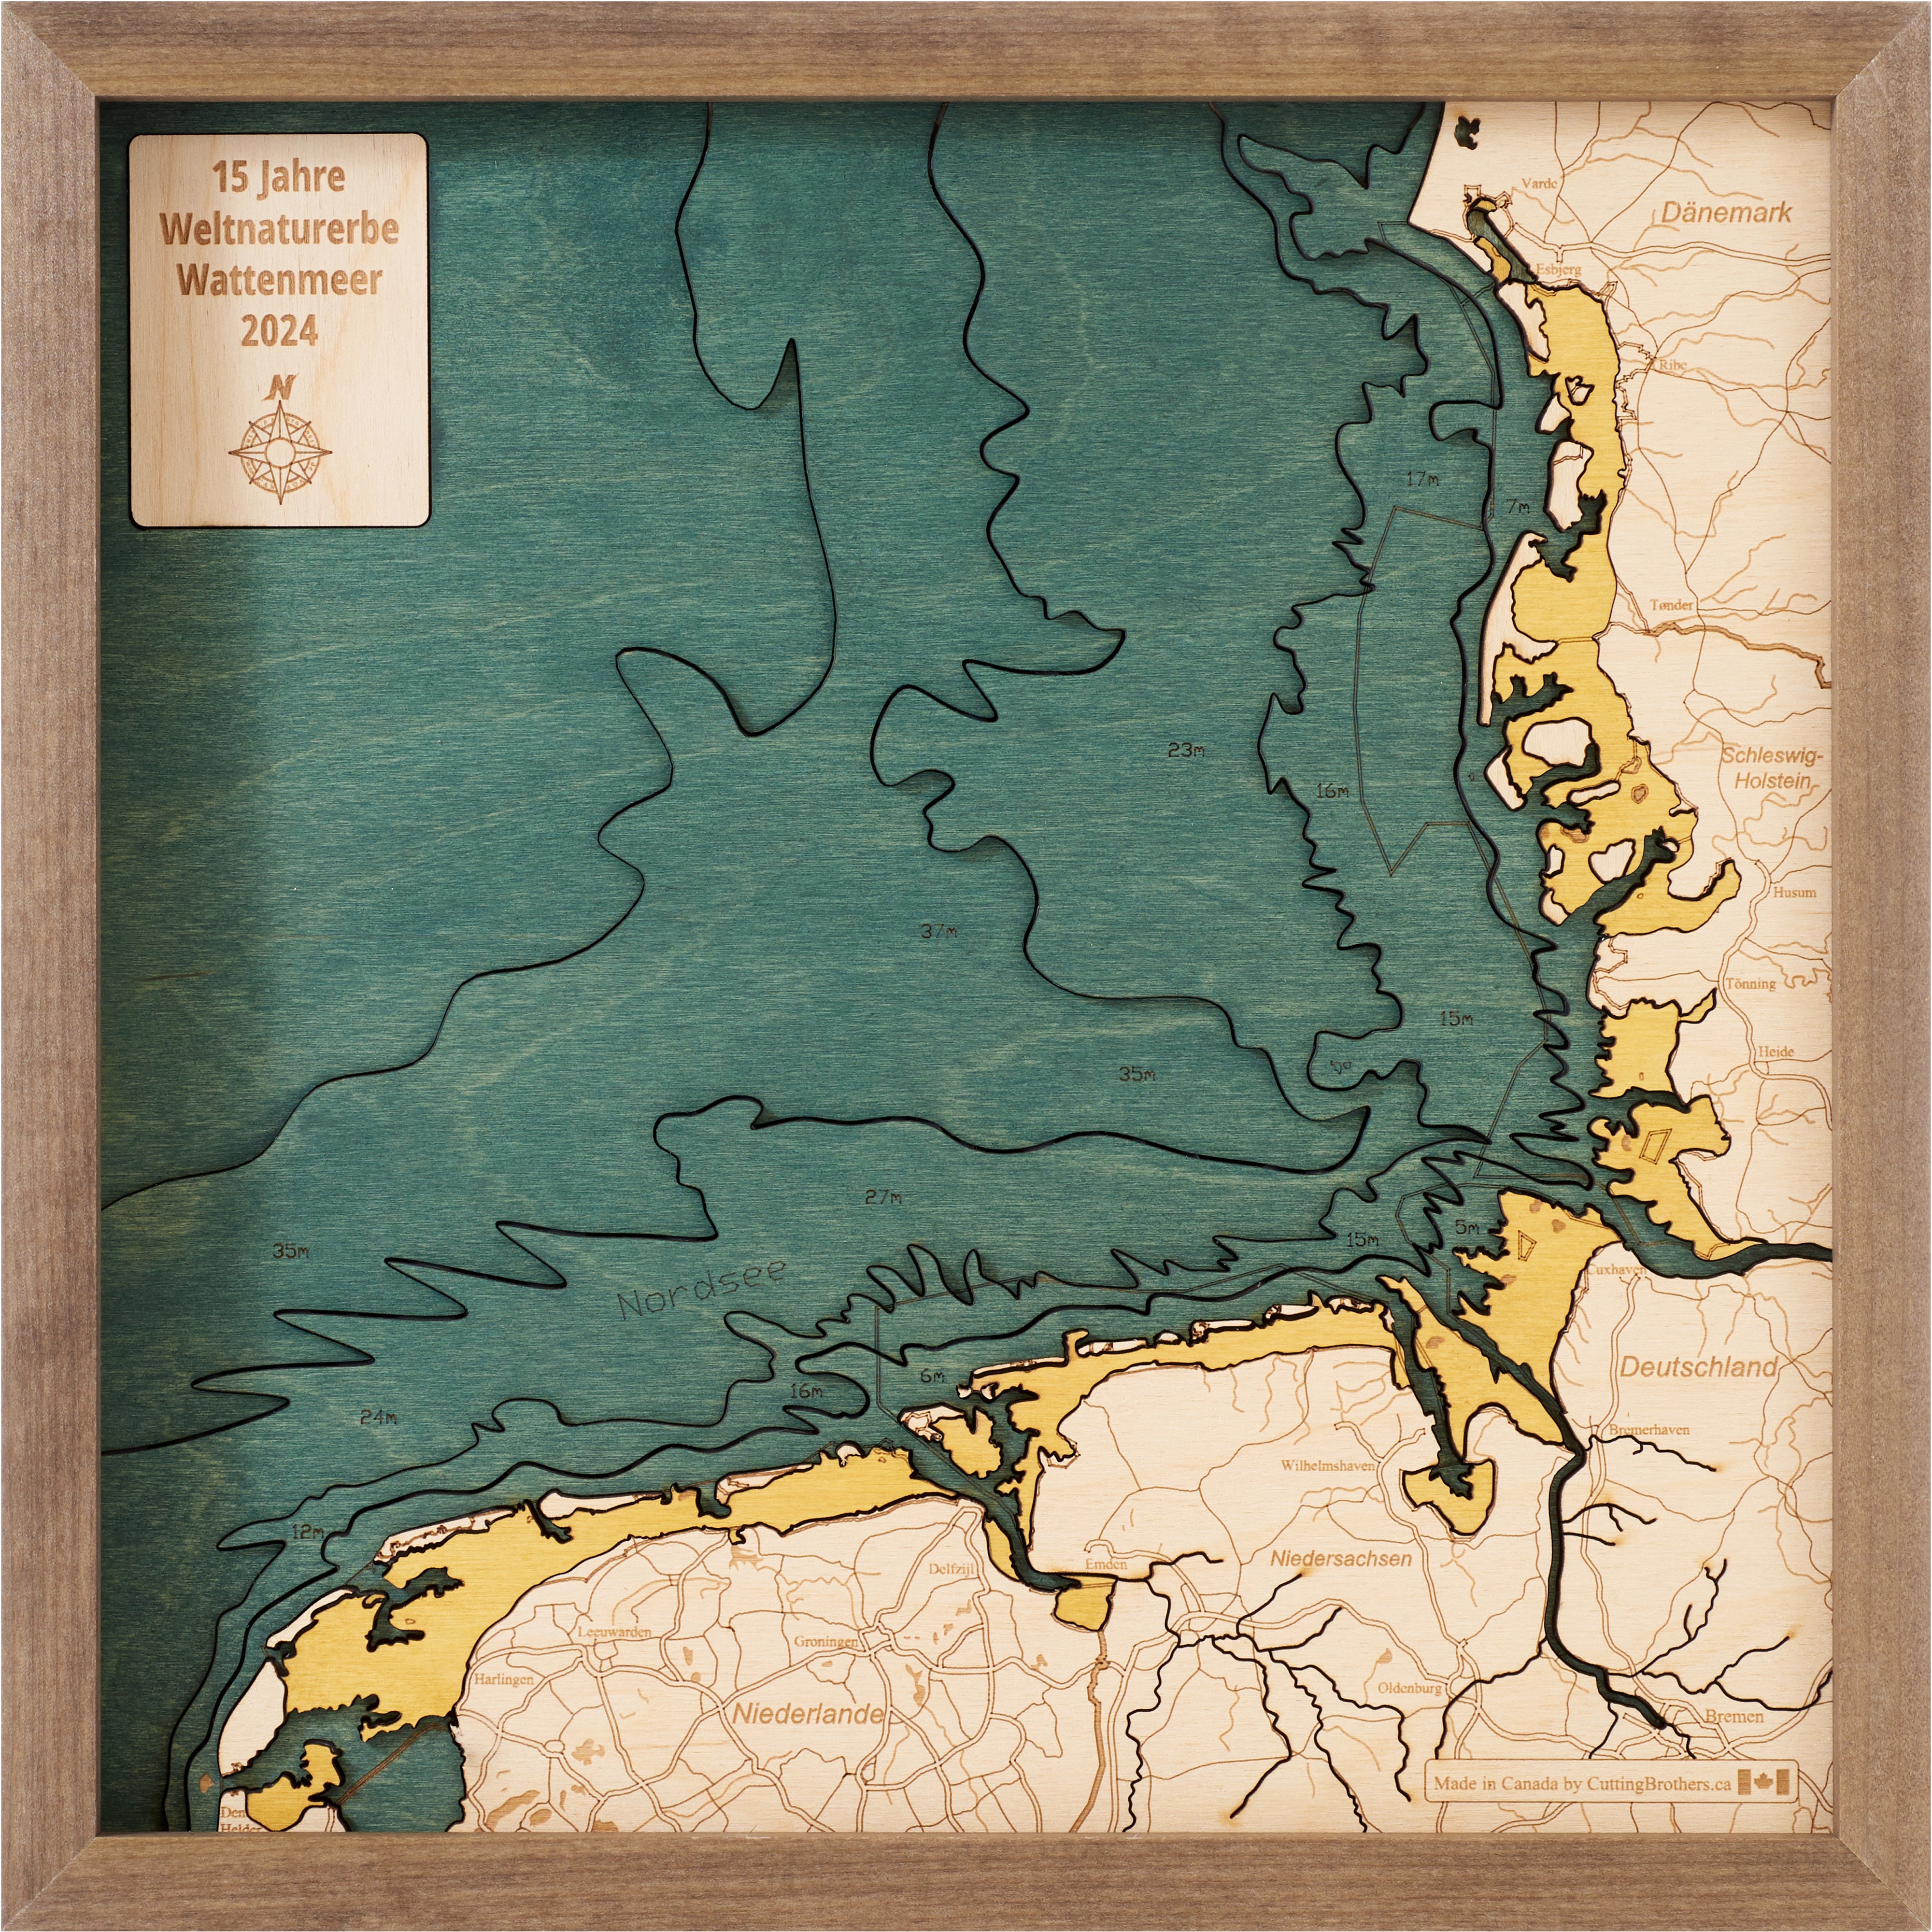 WADDEN SEA 15 Years of UNESCO World Heritage 3D Wooden Wall Map - Version S 